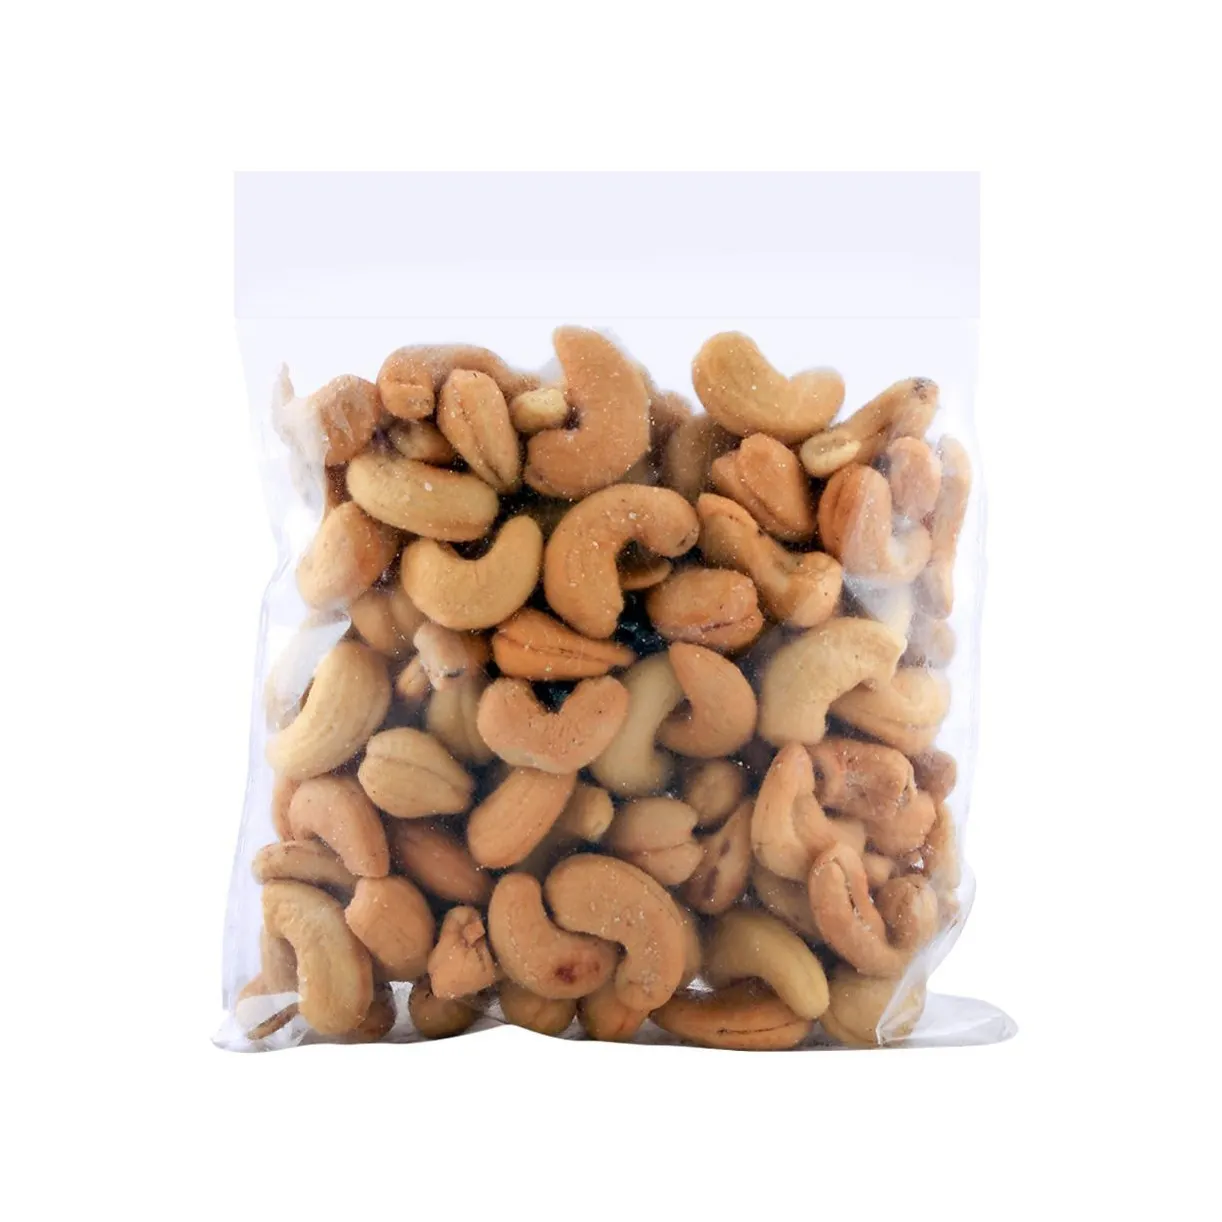 Bulk Vietnam Cashew Nuts W420 Best Quality Cheap Price Factory in Vietnam 100% Natural For Wholesale